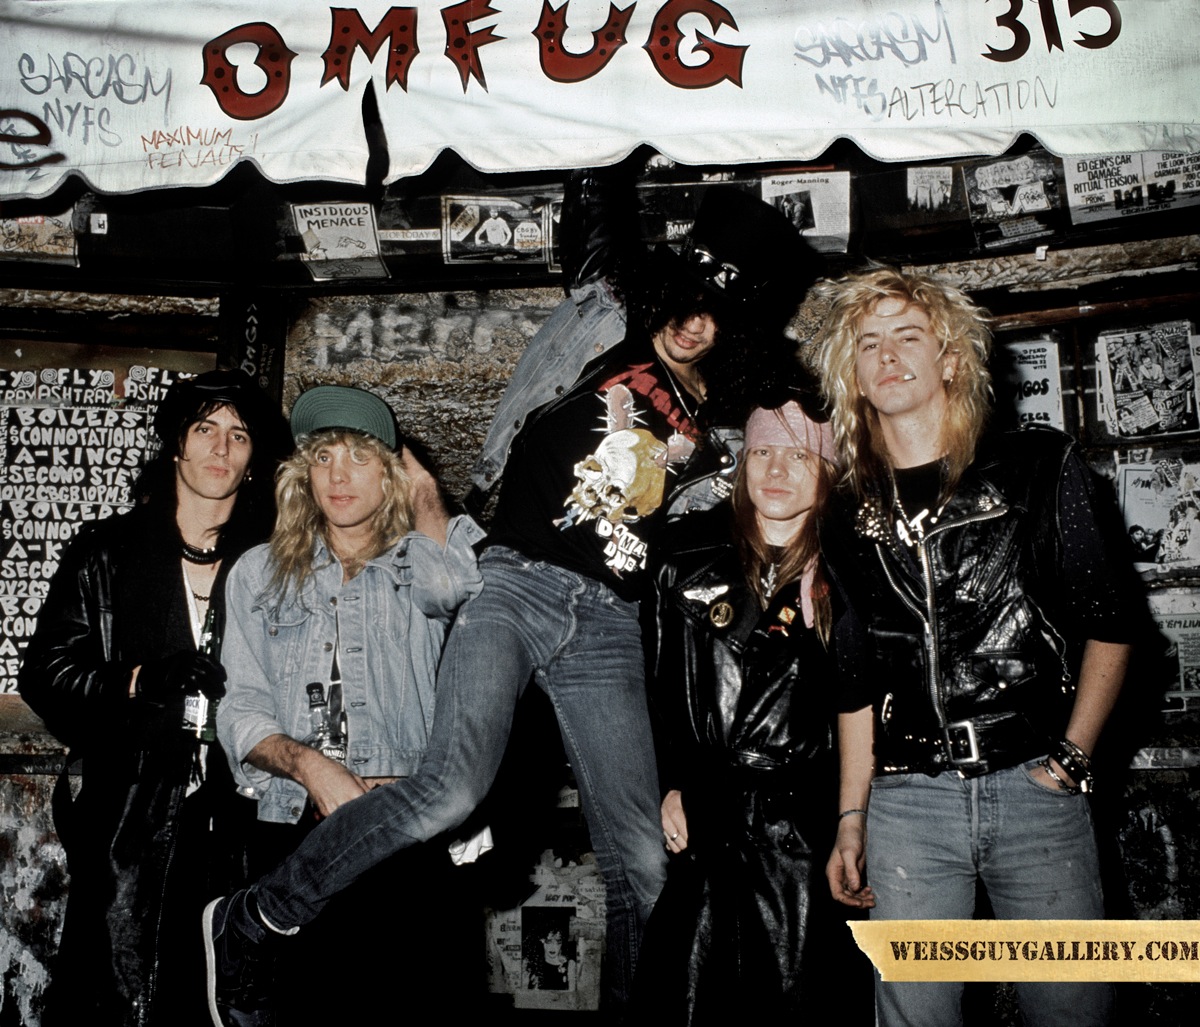 Guns N Roses: GNR hit the scene in ���87 and immediately they had an edge that a lot of the 80���s bands didn���t have. They had a dangerous punky attitude that was more akin to Johnny Thunder���s Heartbreakers than Jon Bon Jovi. I love Slash���s guitar work especially in the arena of 80���s shred guitar as his whole thing was about feel and groove. This translated to the GNR songs which made them really unique in that environment. I still bump into the guys occasionally and we have a great rapport.���